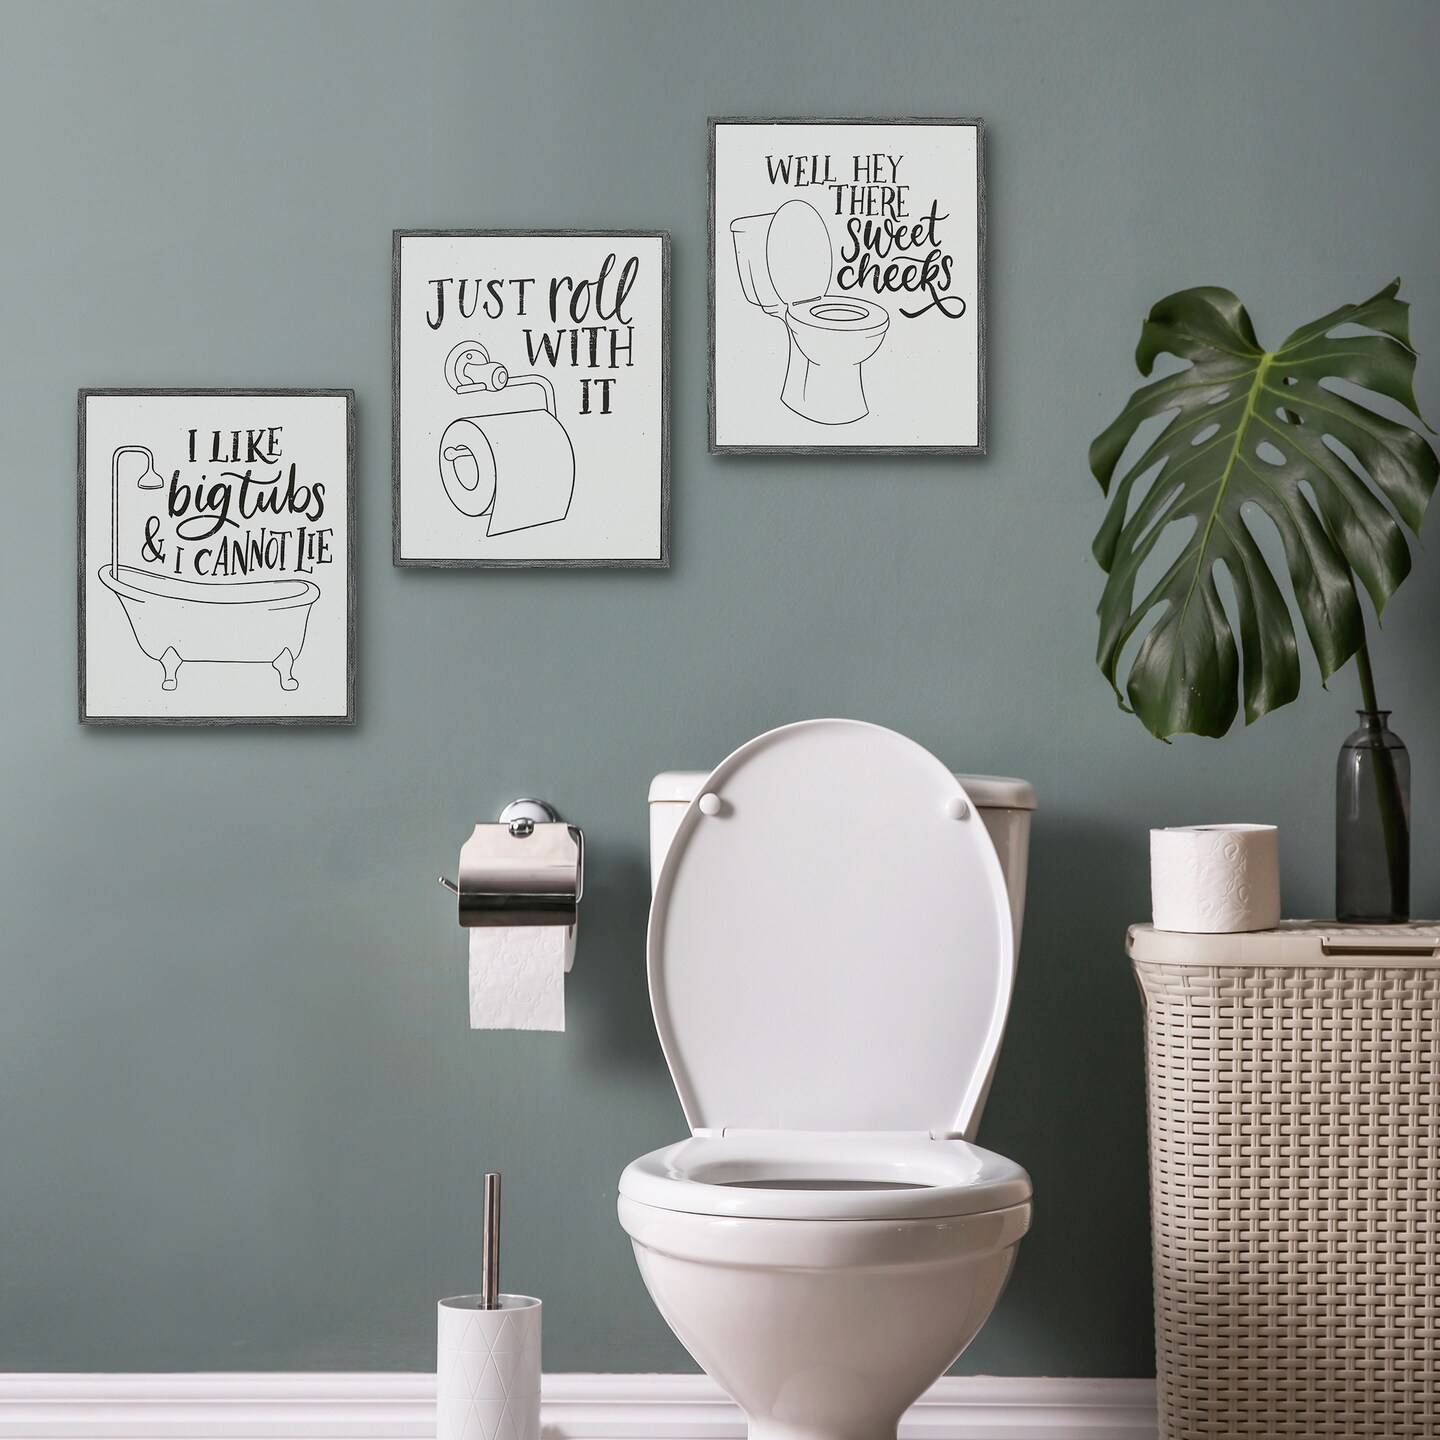 Americanflat Funny Bathroom Signs 3PK - Just Roll With It, I Like Big Tubs and Hello Sweet Cheeks - Three 8x10 Bathroom Signs for Wall Decor